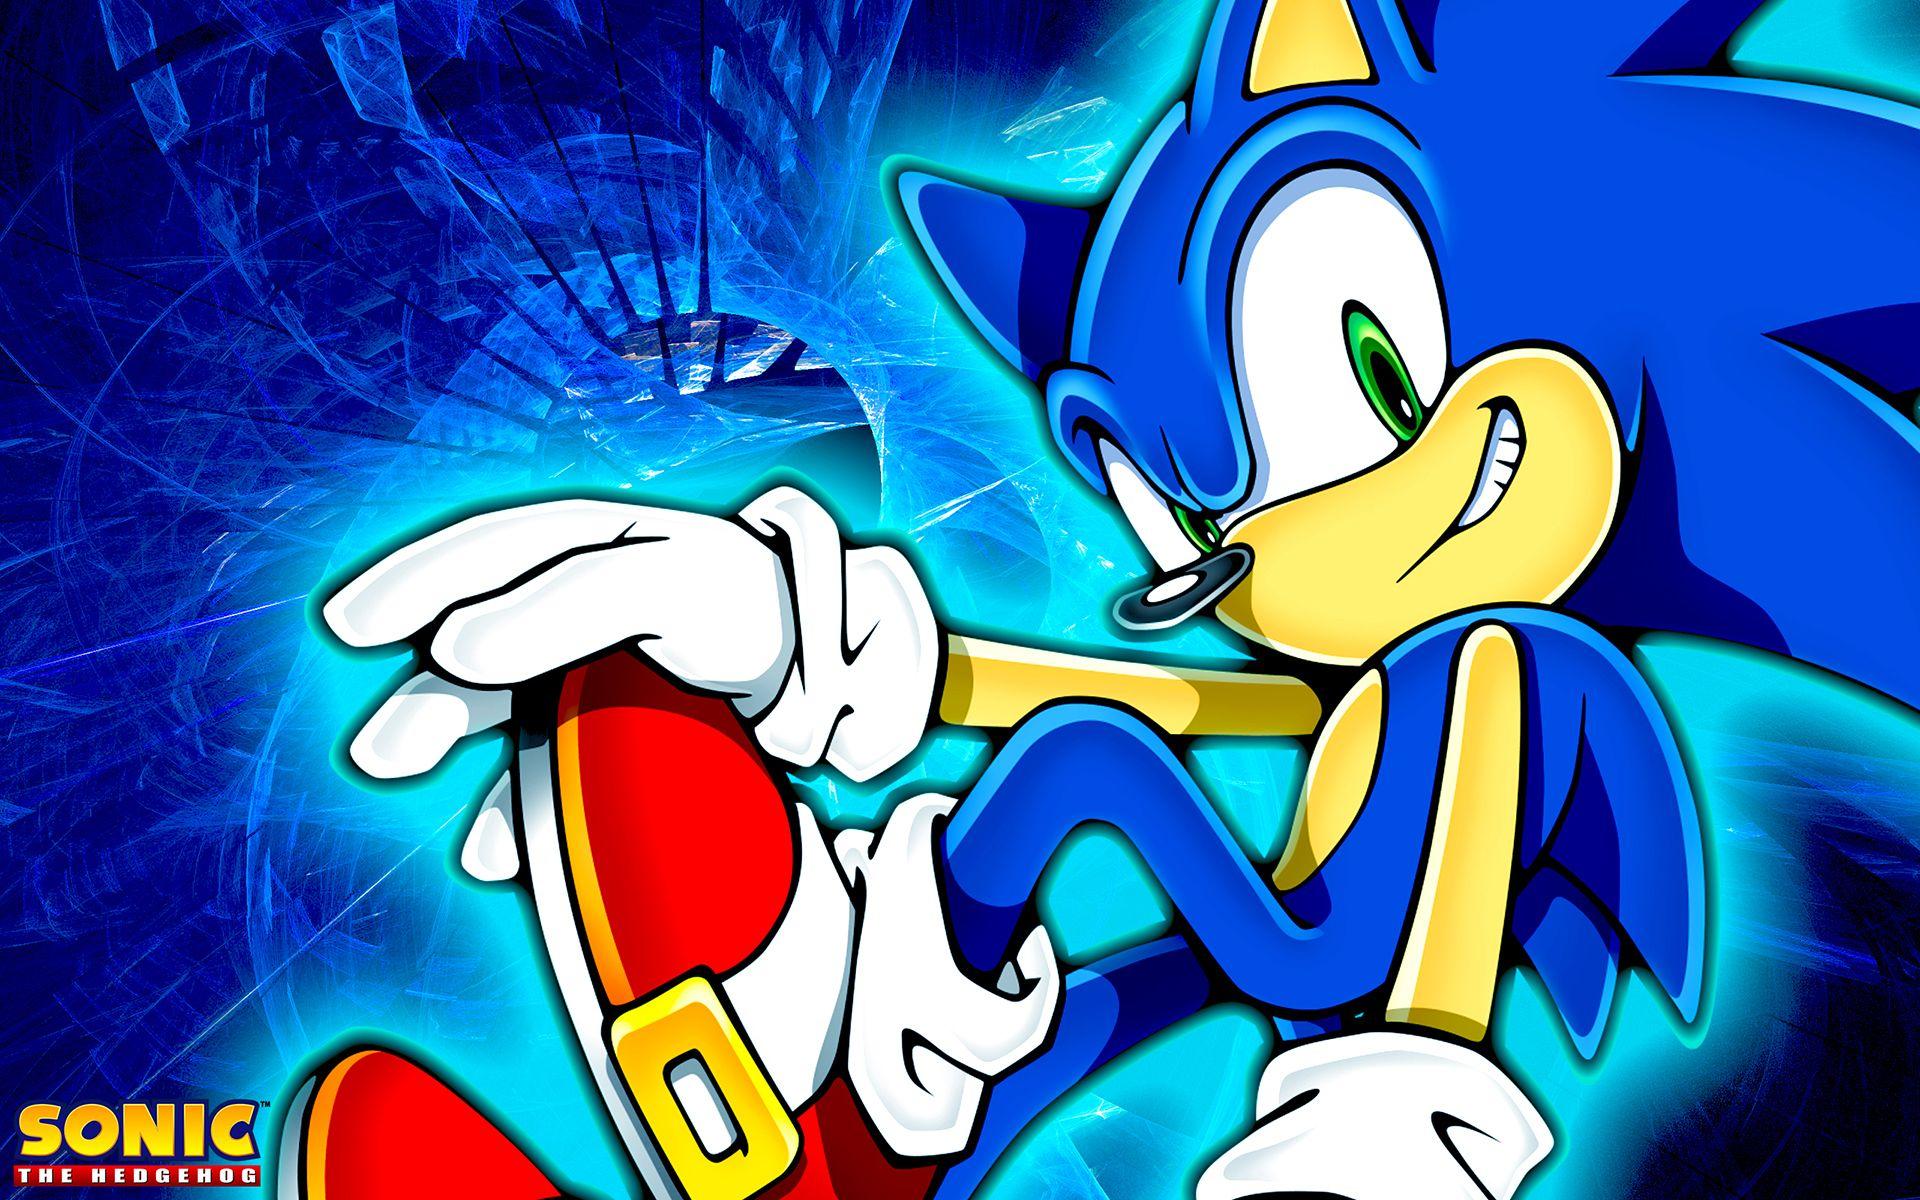 Classic Sonic The Hedgehog And Friends Wallpaper